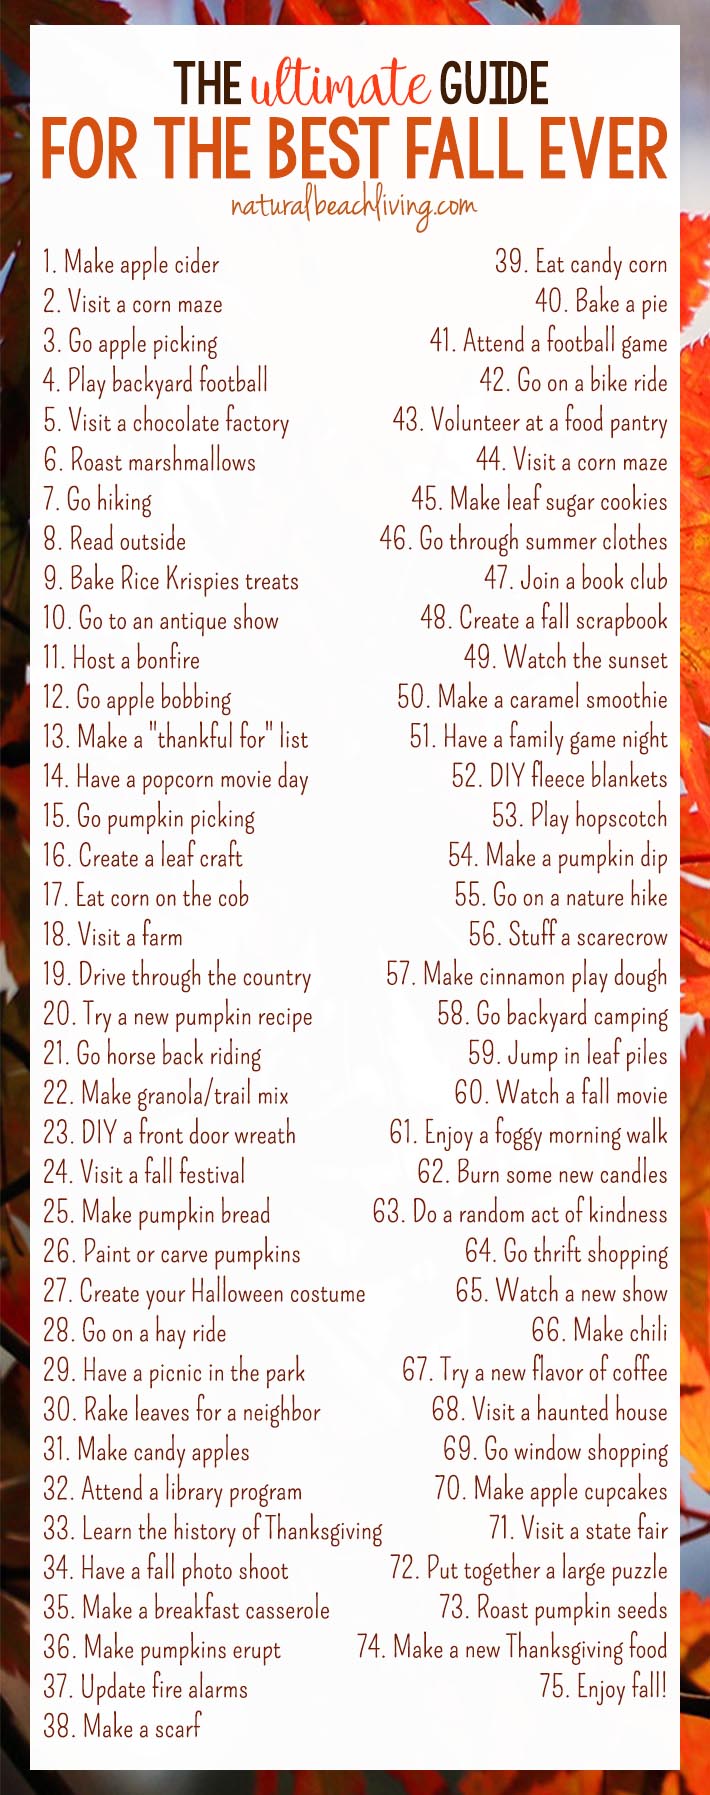 30 Days of Fall Activities for the Whole Family, Fall Activities for Kids, Fall Activities for Adults, From picking apples to making a scarecrow, there's something for everyone! And to make things even easier, we've provided a free printable Fall Bucket List so you can keep track of all the fun things you do, Fall ideas, Autumn